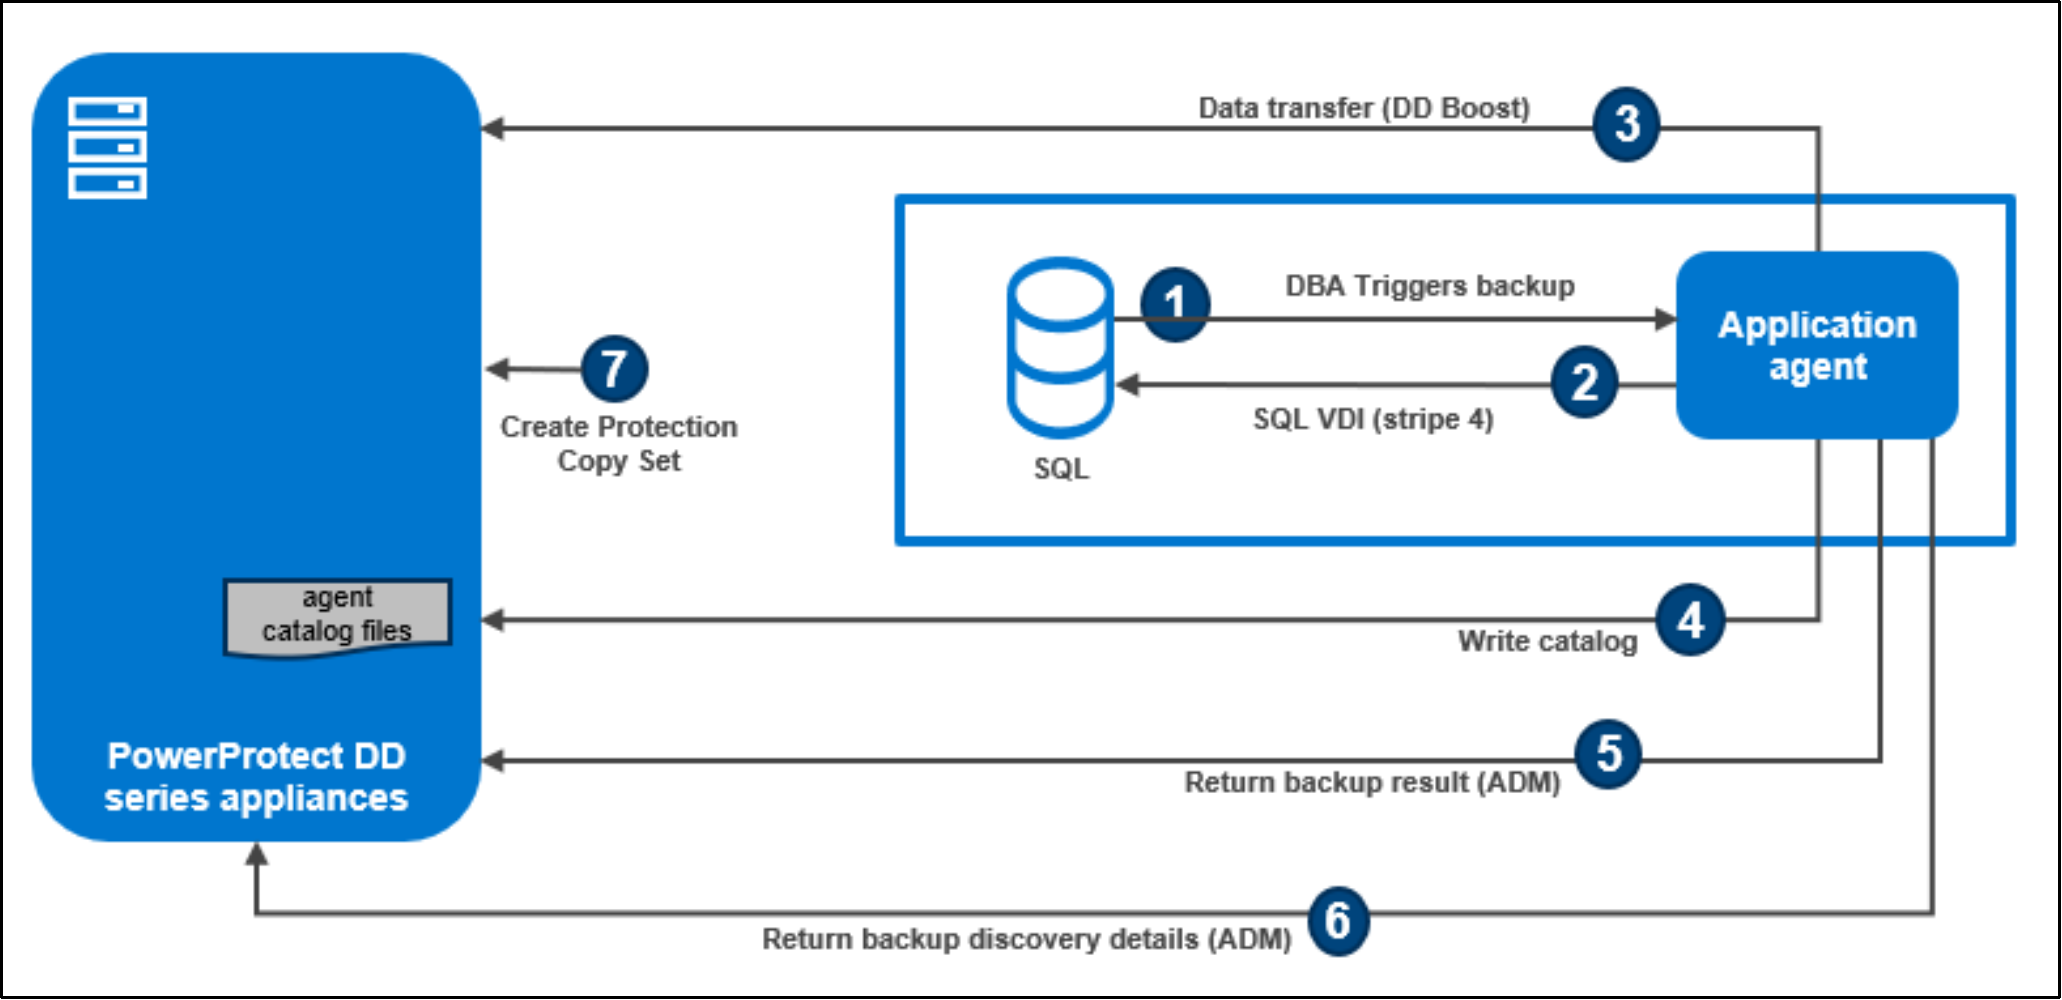 The image shows the Self-service Application Direct backup workflow (FULL)